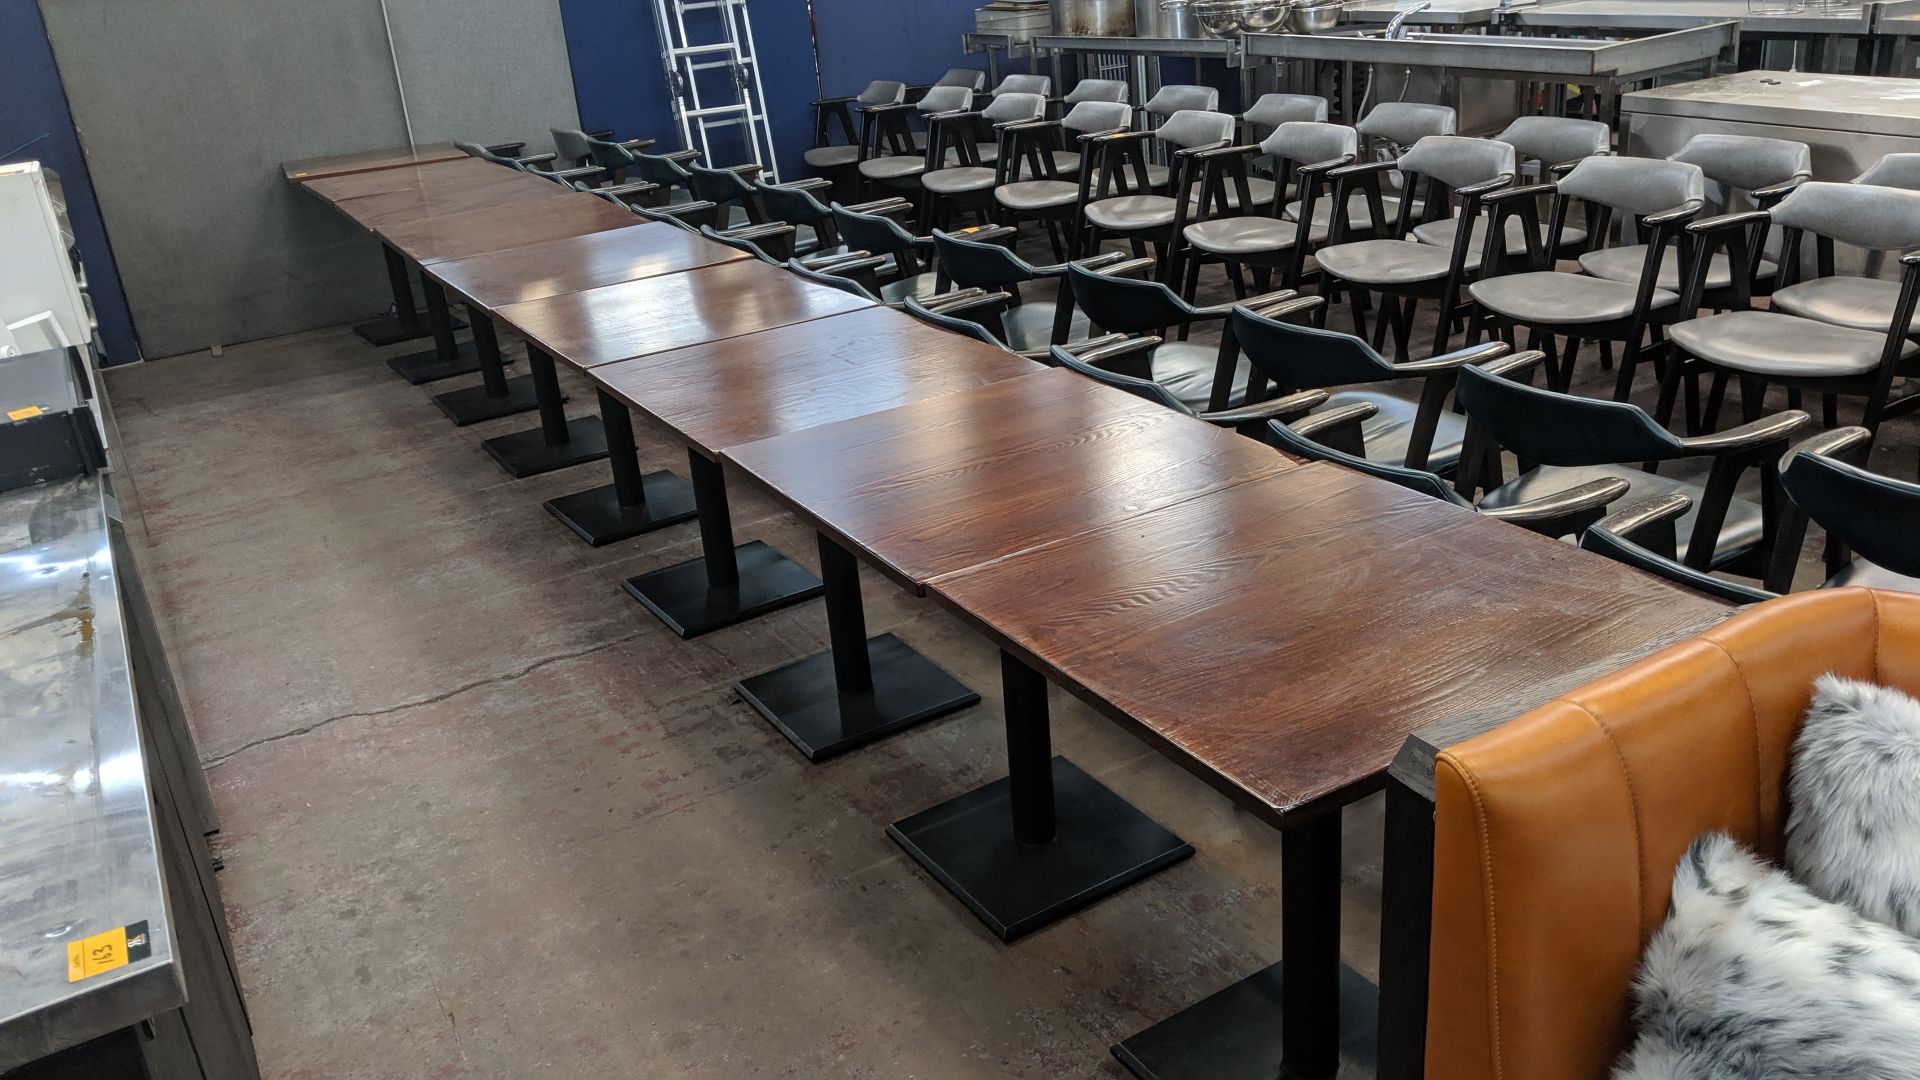 9 off matching square wooden dining tables on single pedestal bases, each with a table top measuring - Image 2 of 5